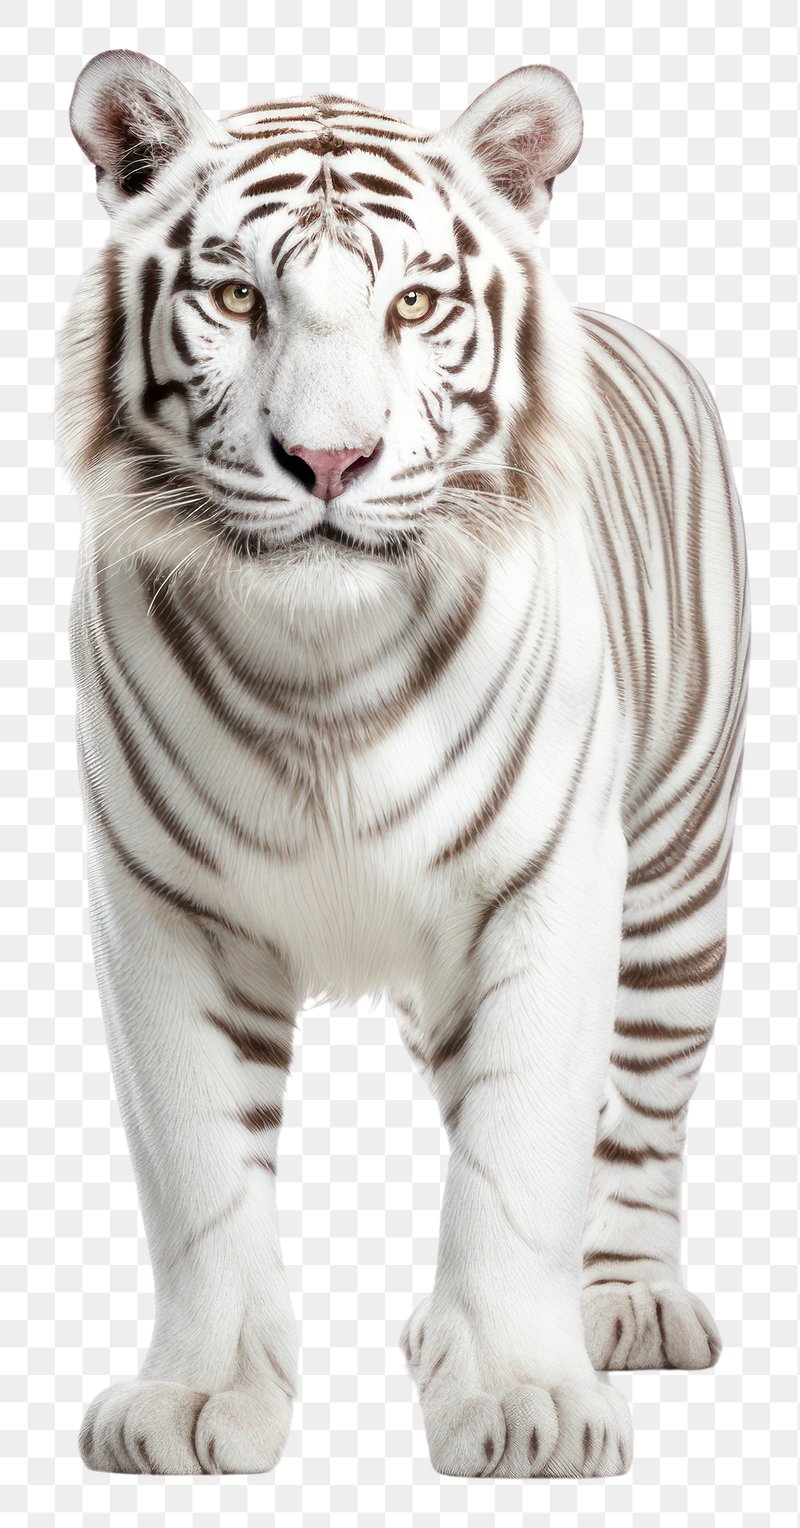 black and white tiger image